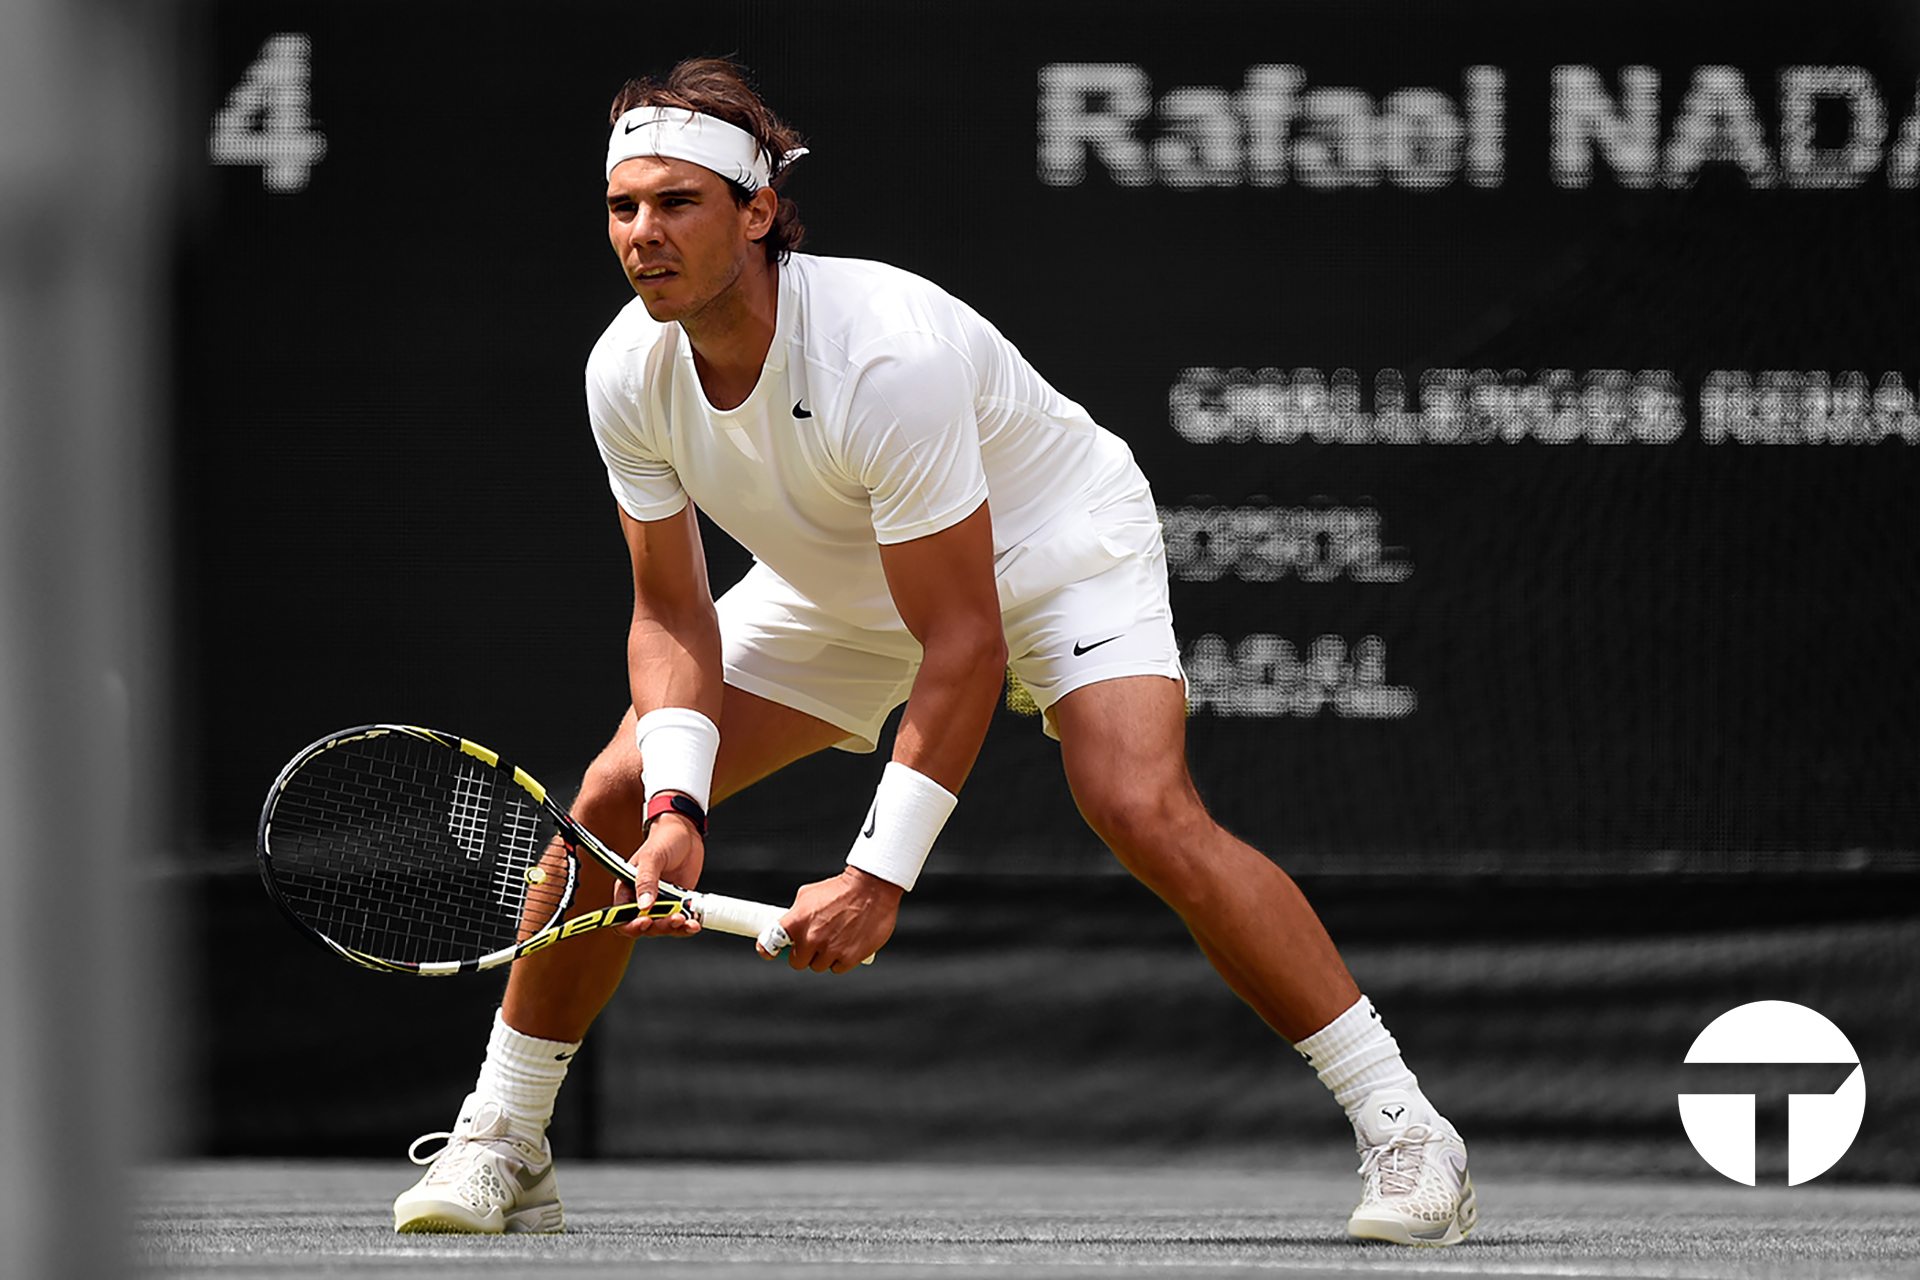 Nadal in the universal athletic position